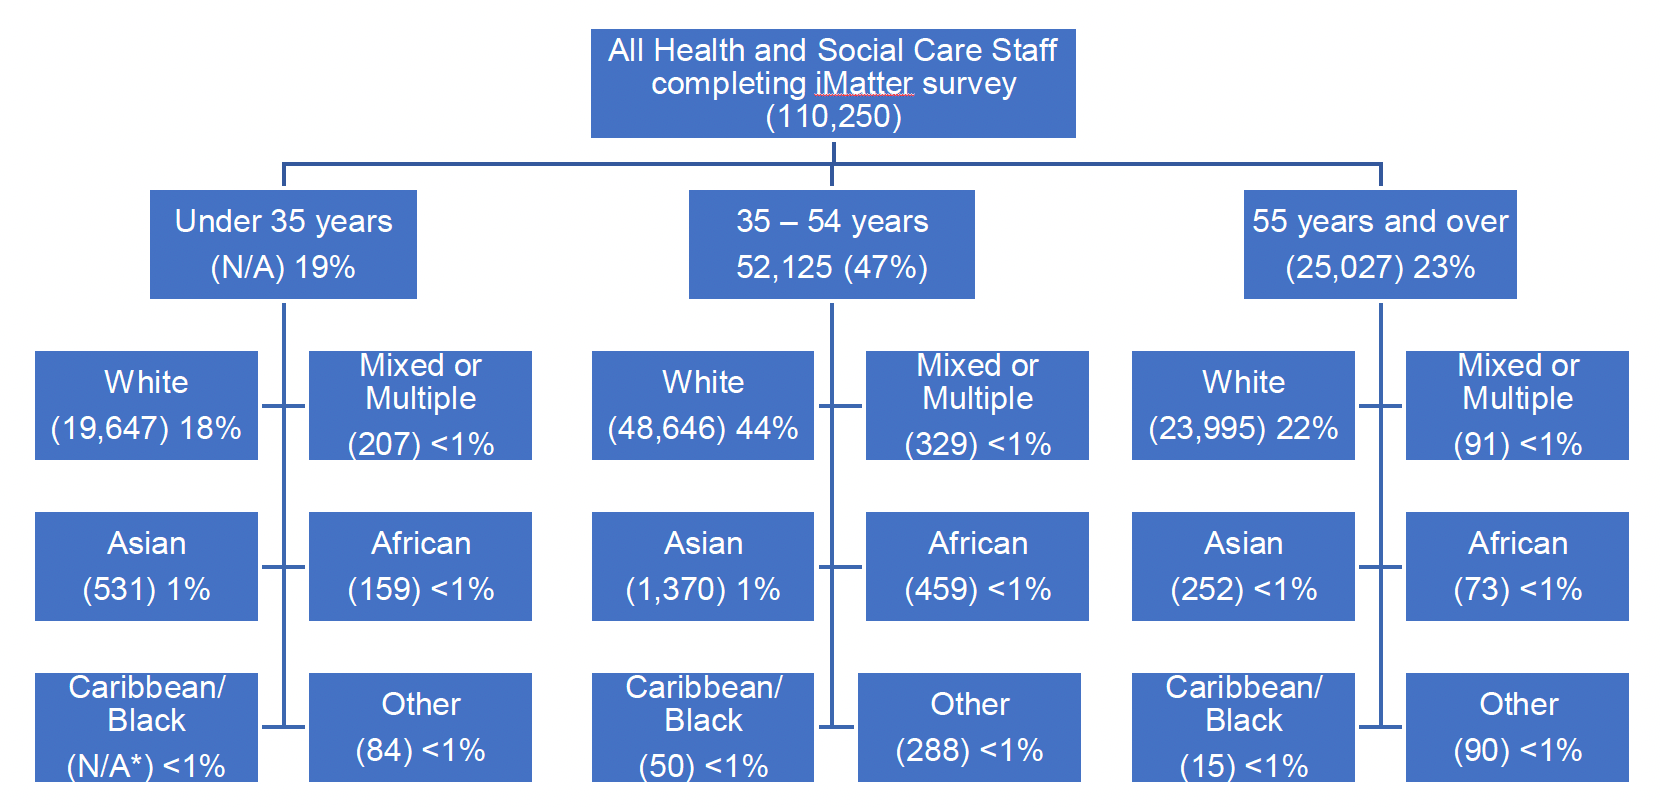 Comparison of the health and social care staff age groups broken down by age and ethnic group.  Appendix 3 presents numbers in an accessible format. 